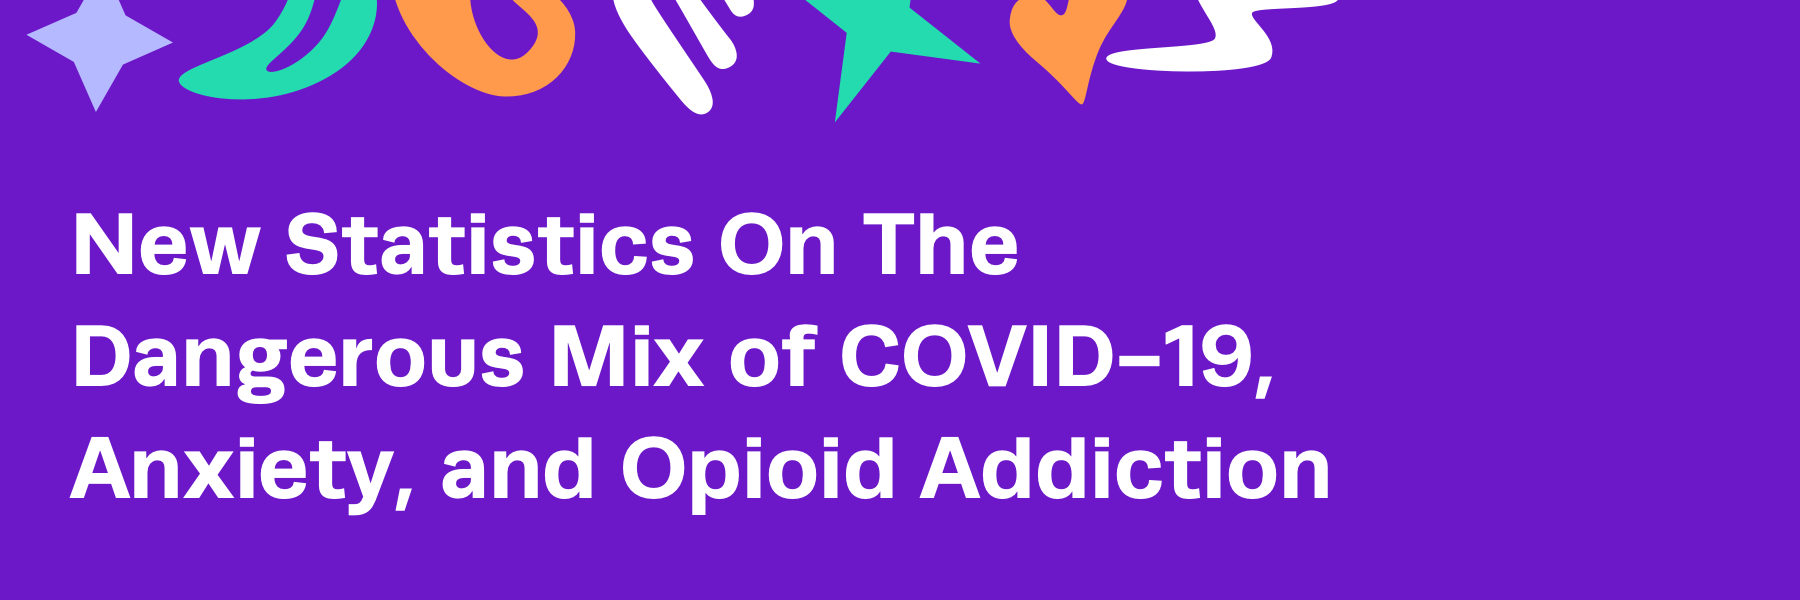 New Statistics On The Dangerous Mix of COVID-19, Anxiety, and Opioid Addiction